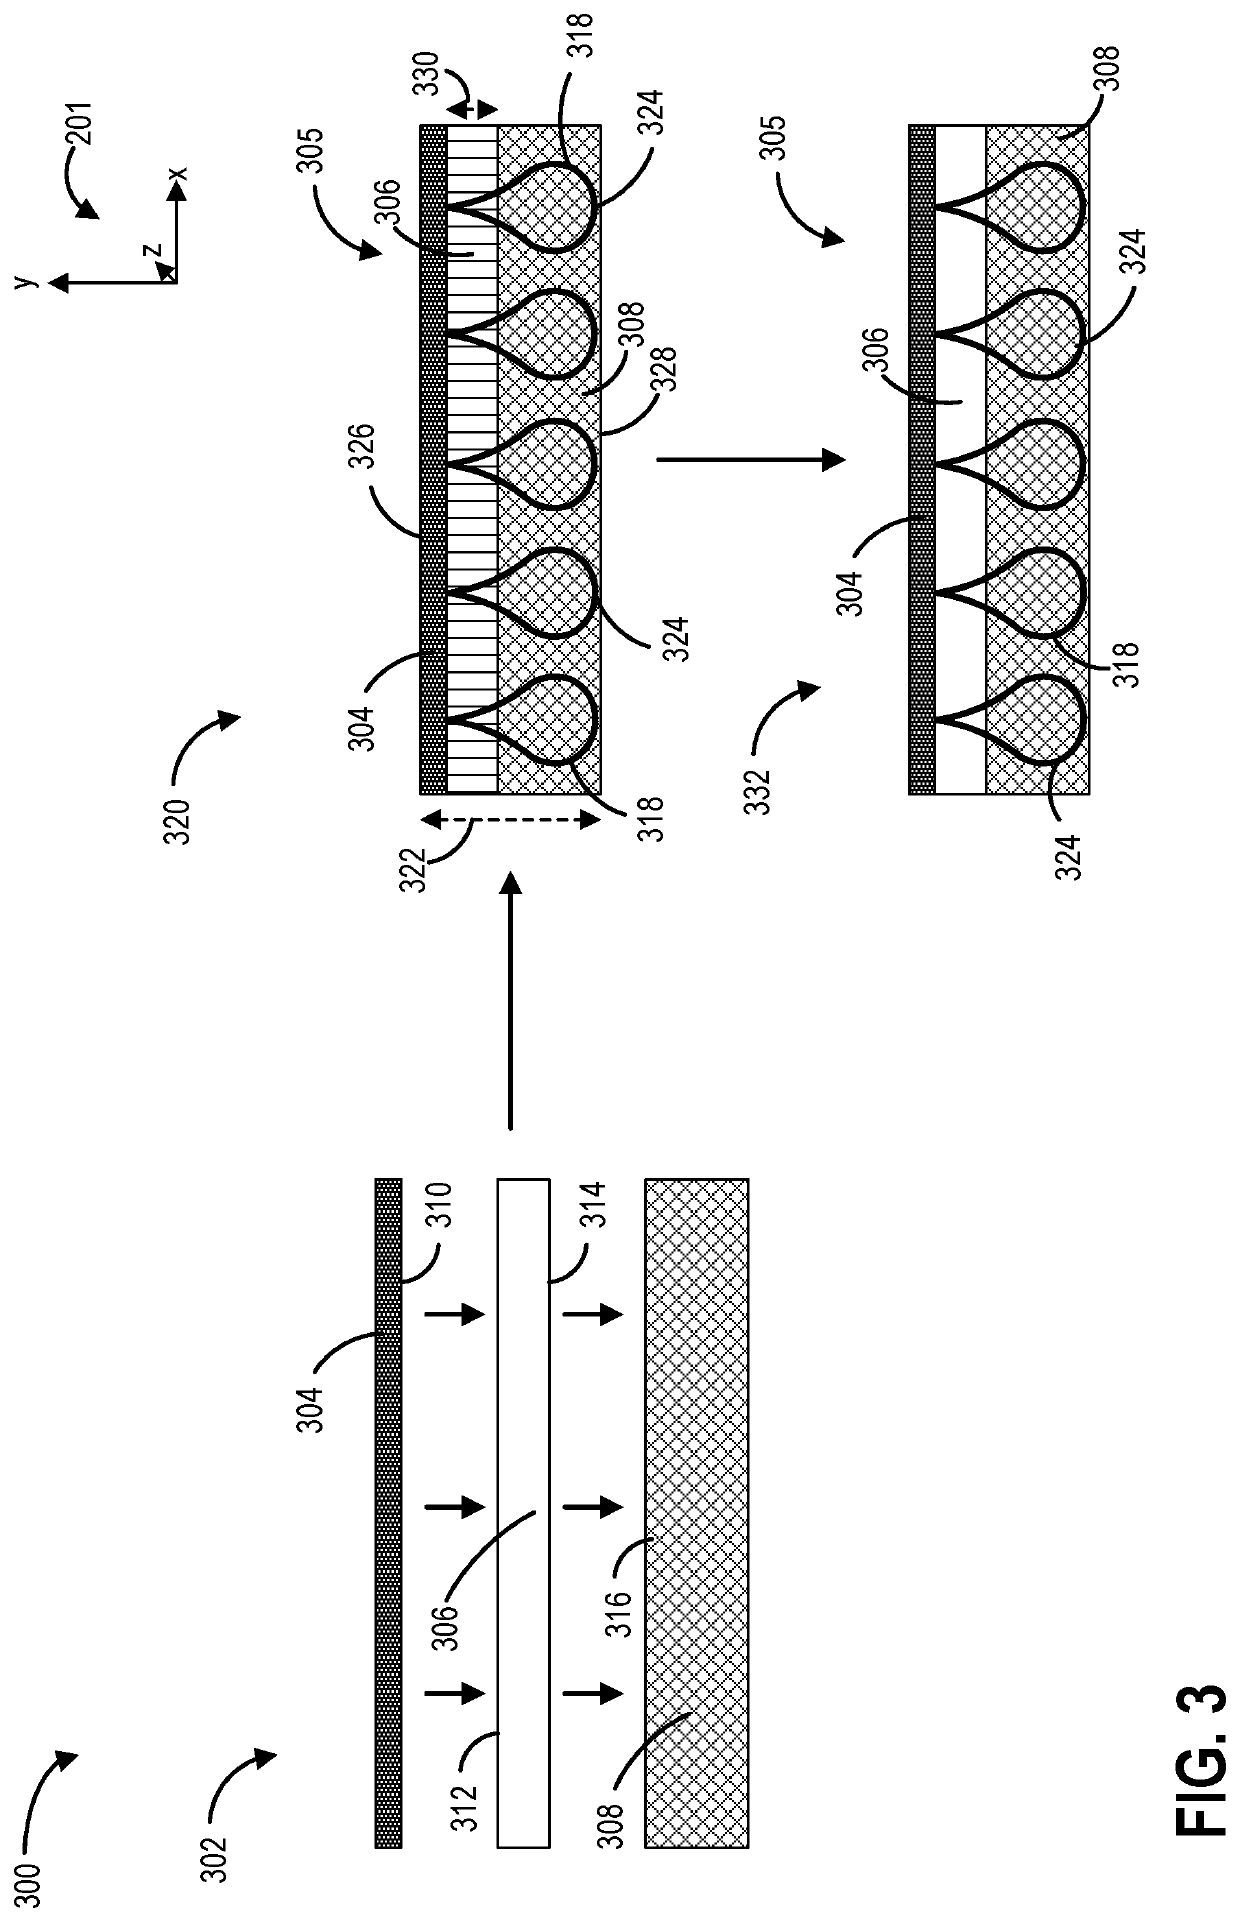 Methods and system for manufacturing a redfox flow battery system by roll-to-roll processing